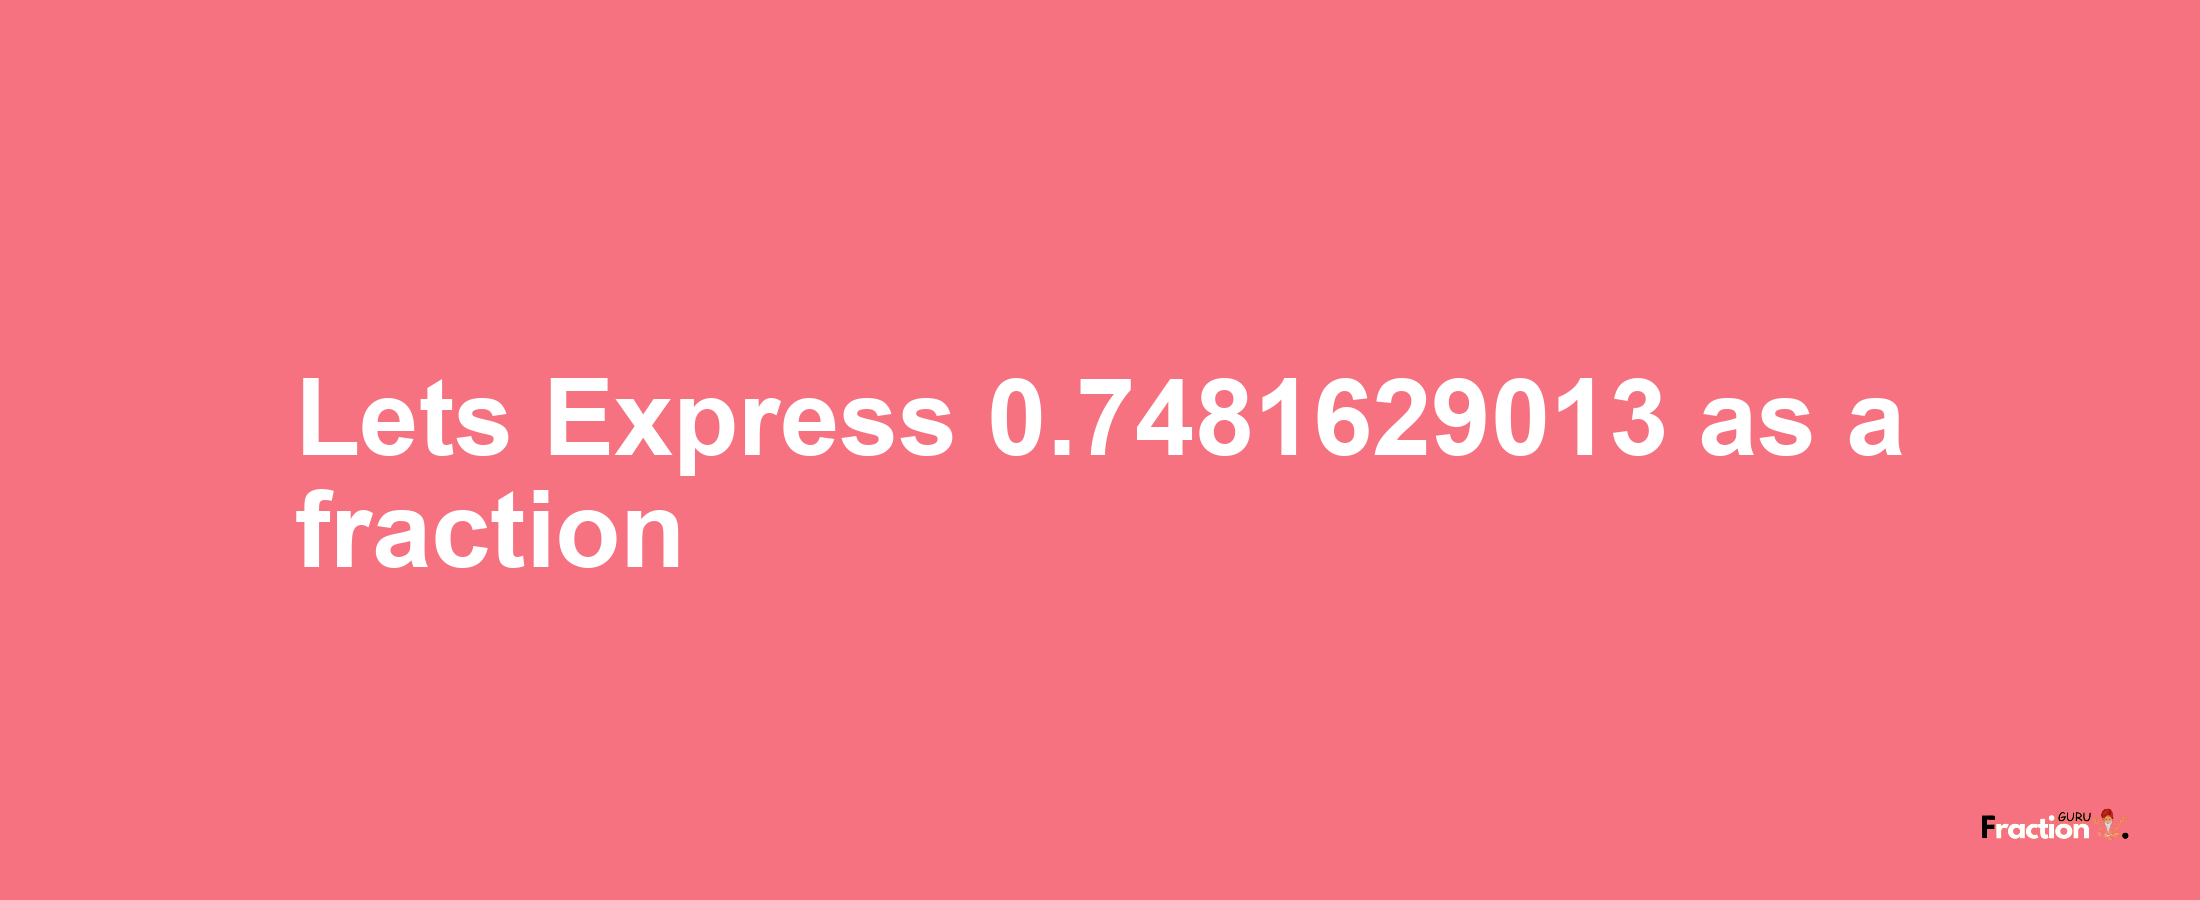 Lets Express 0.7481629013 as afraction